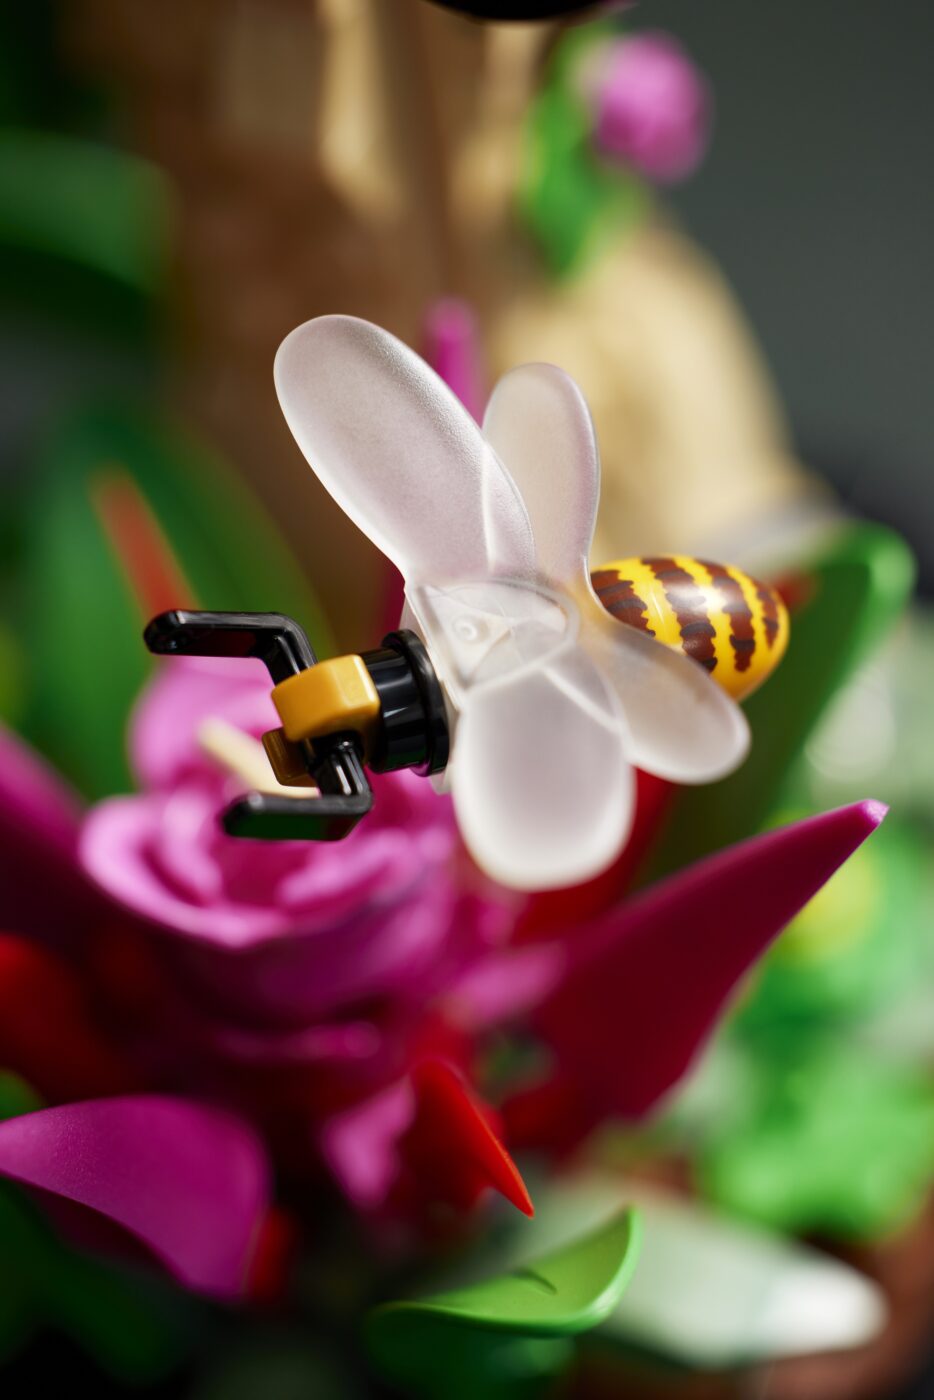 21342 LEGO Insect Collection Lifestyle Bee